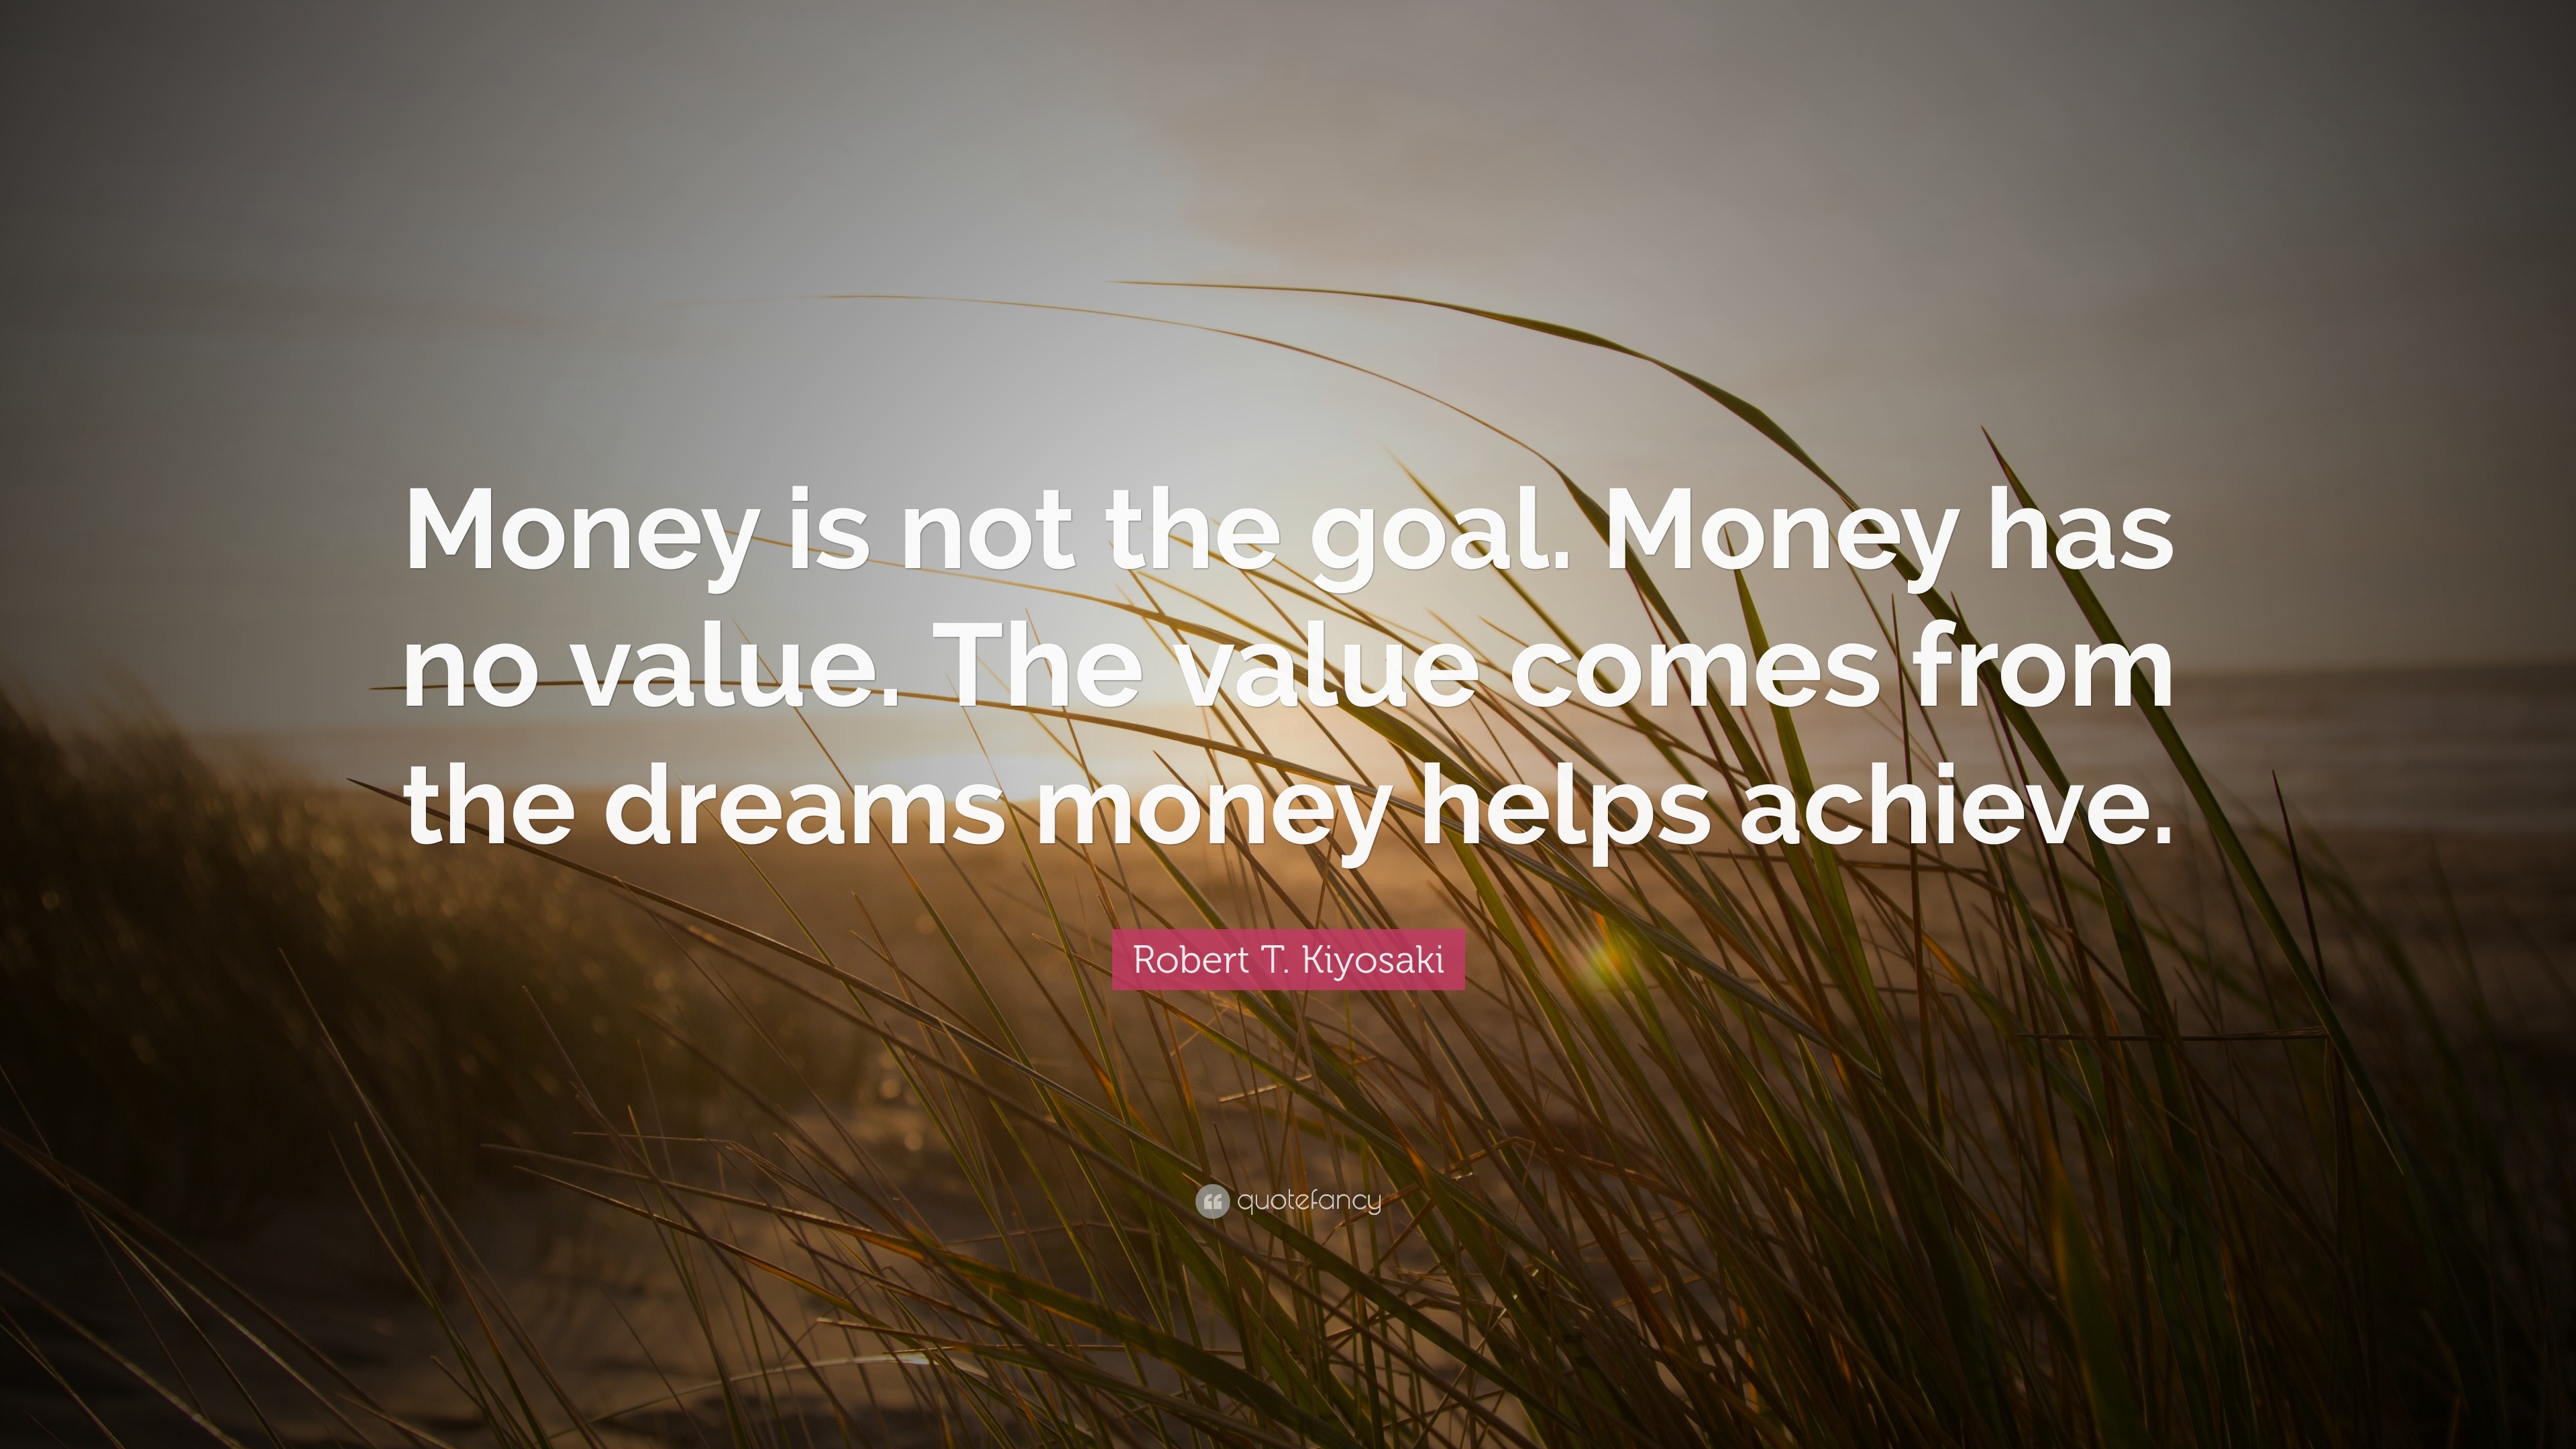 3840x2160 Goal Quotes: “Money is not the goal. Money has no value. The